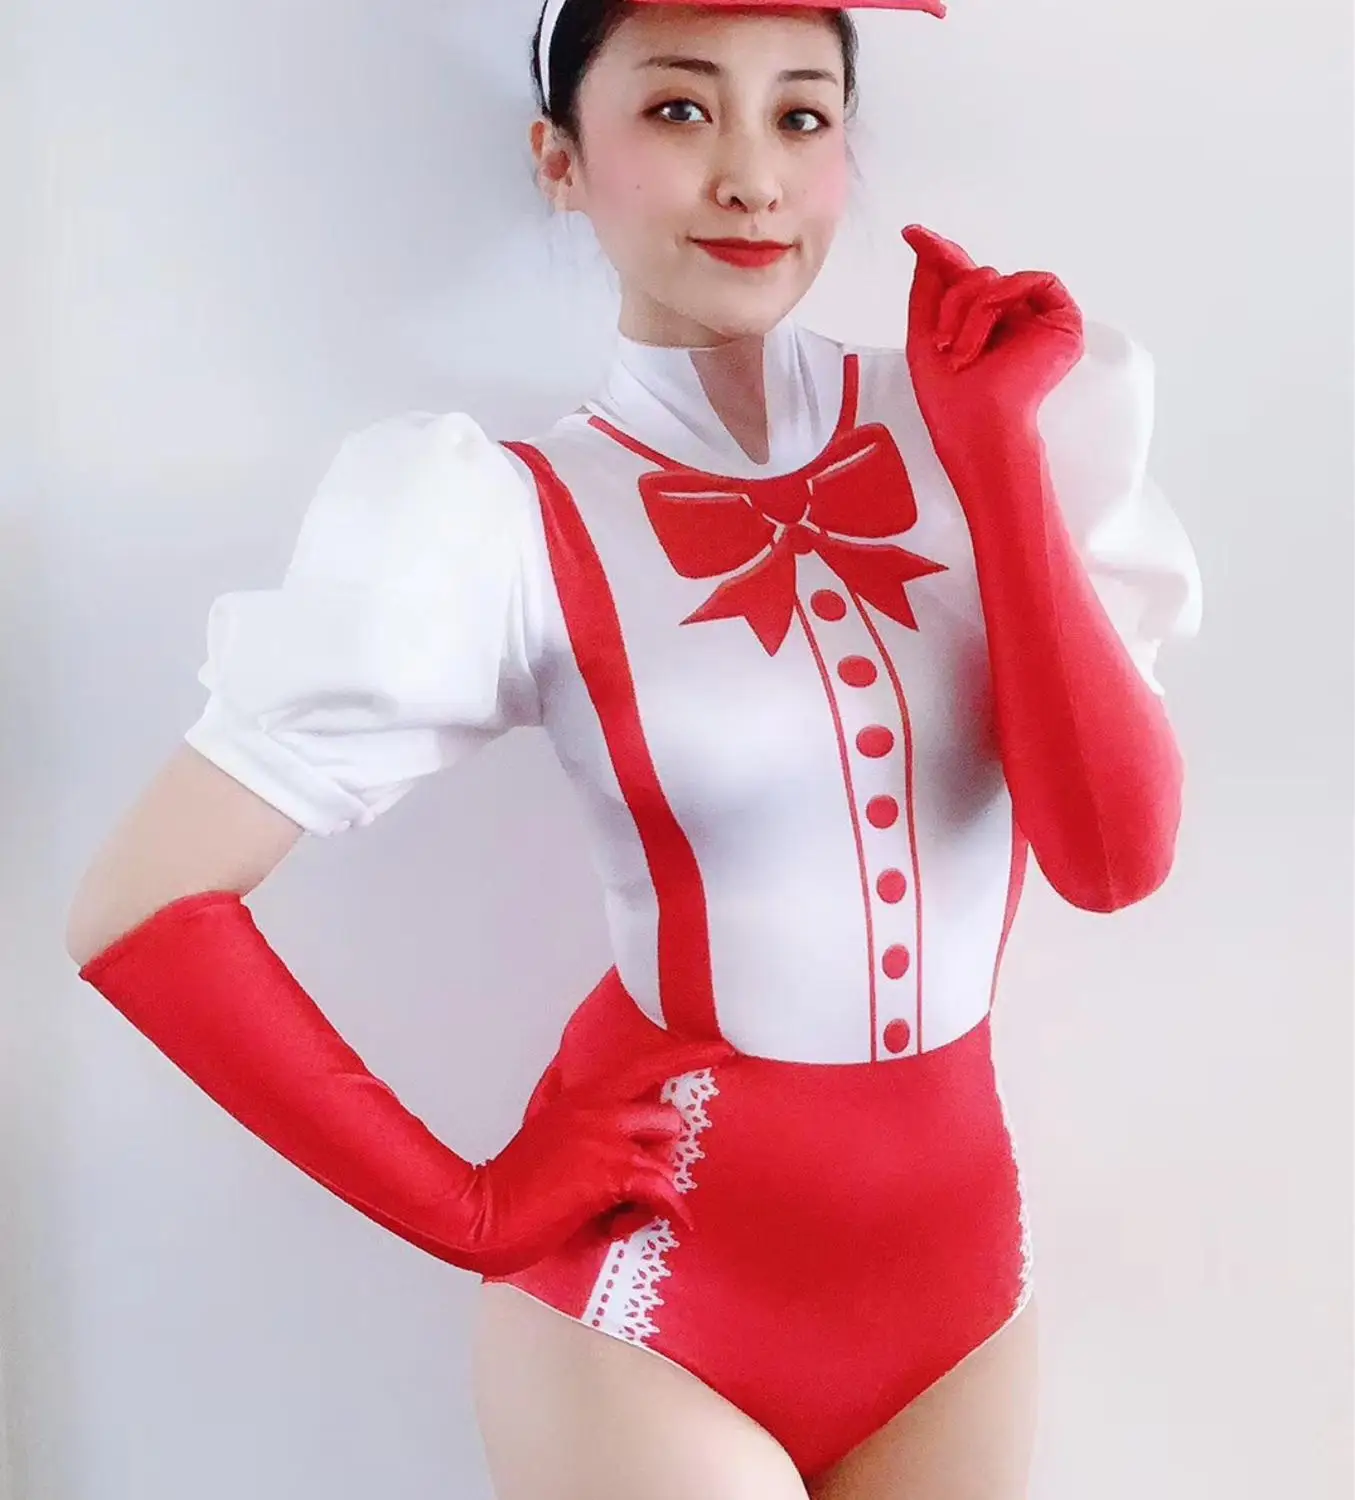 

Fashion Red White Teacher Costume Bodysuit Gloves Outfit Female Dancer Leotard Outfit Nightclub Party Sexy Clothing